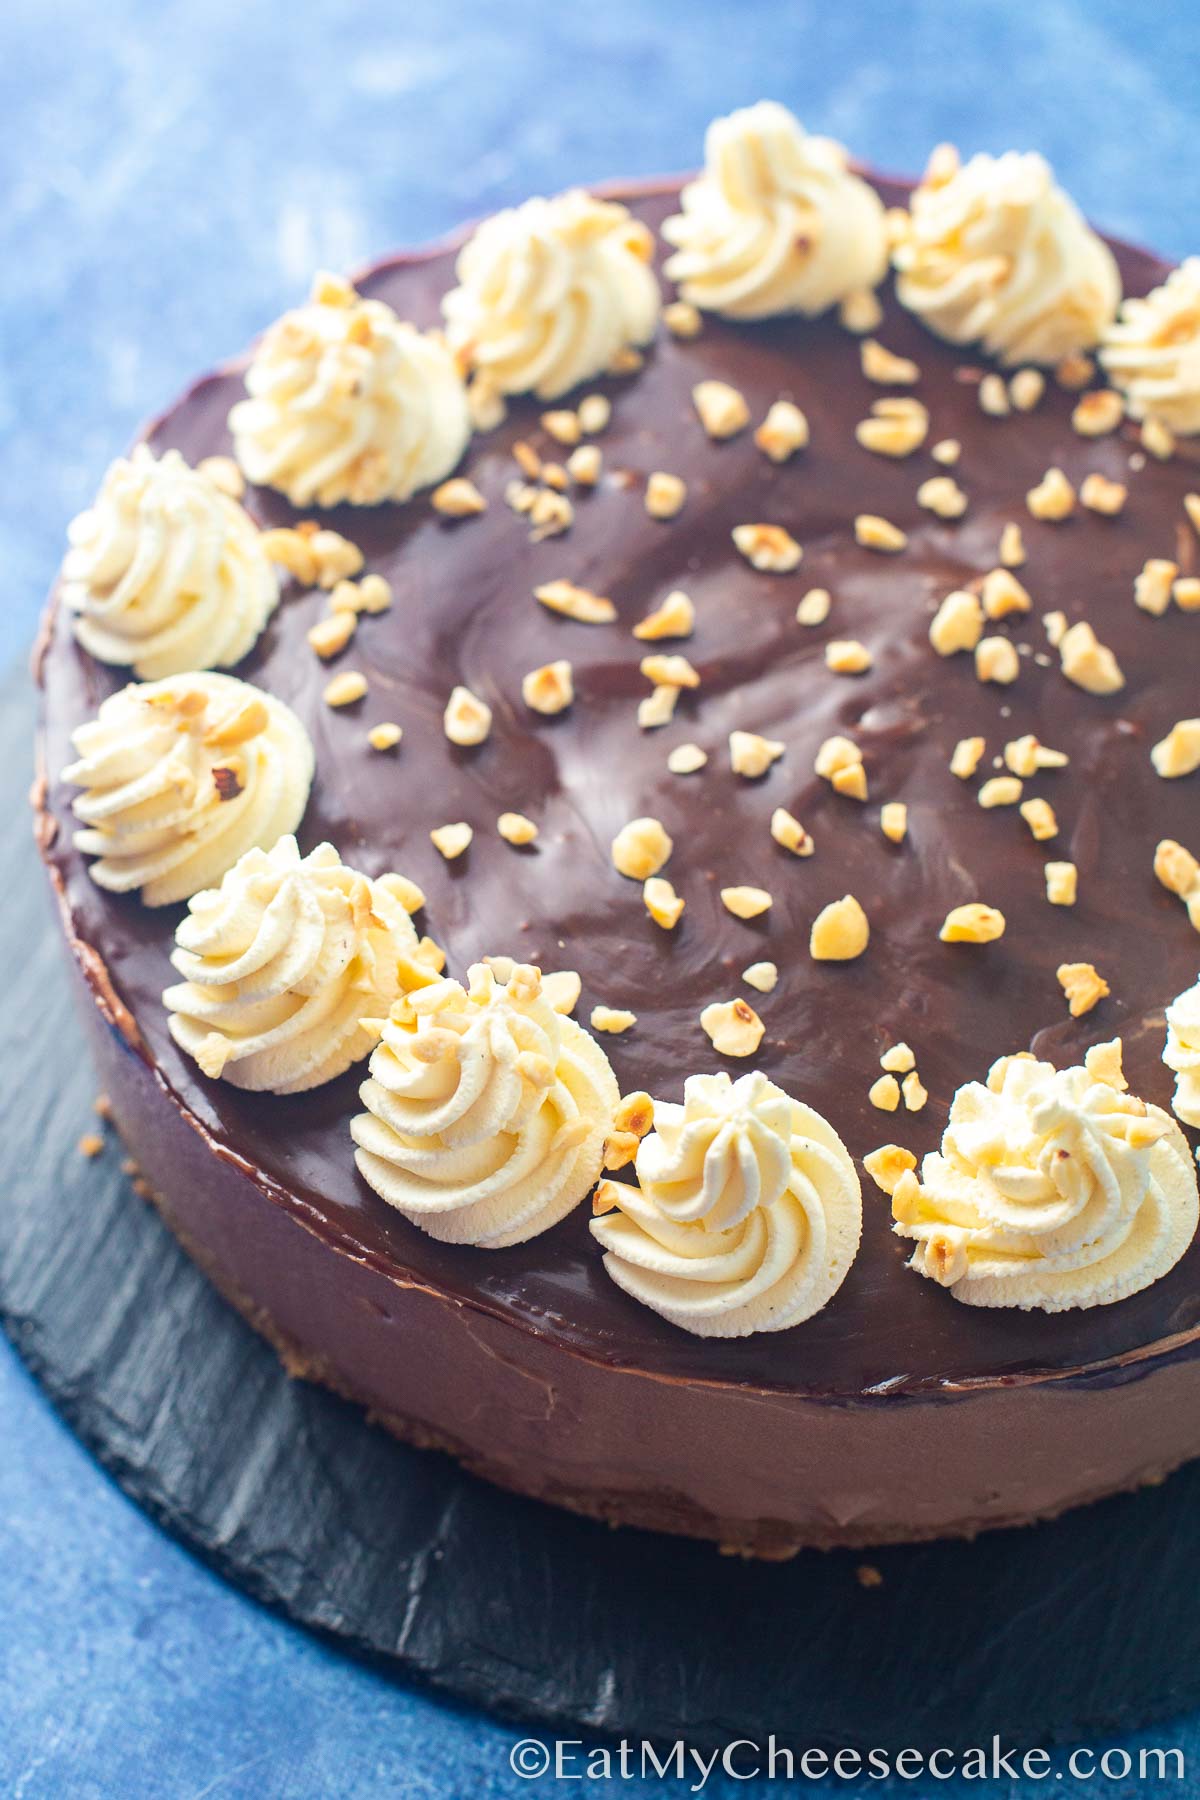 Nutella cheesecake with cream swirl decorations and sprinkled with nuts.